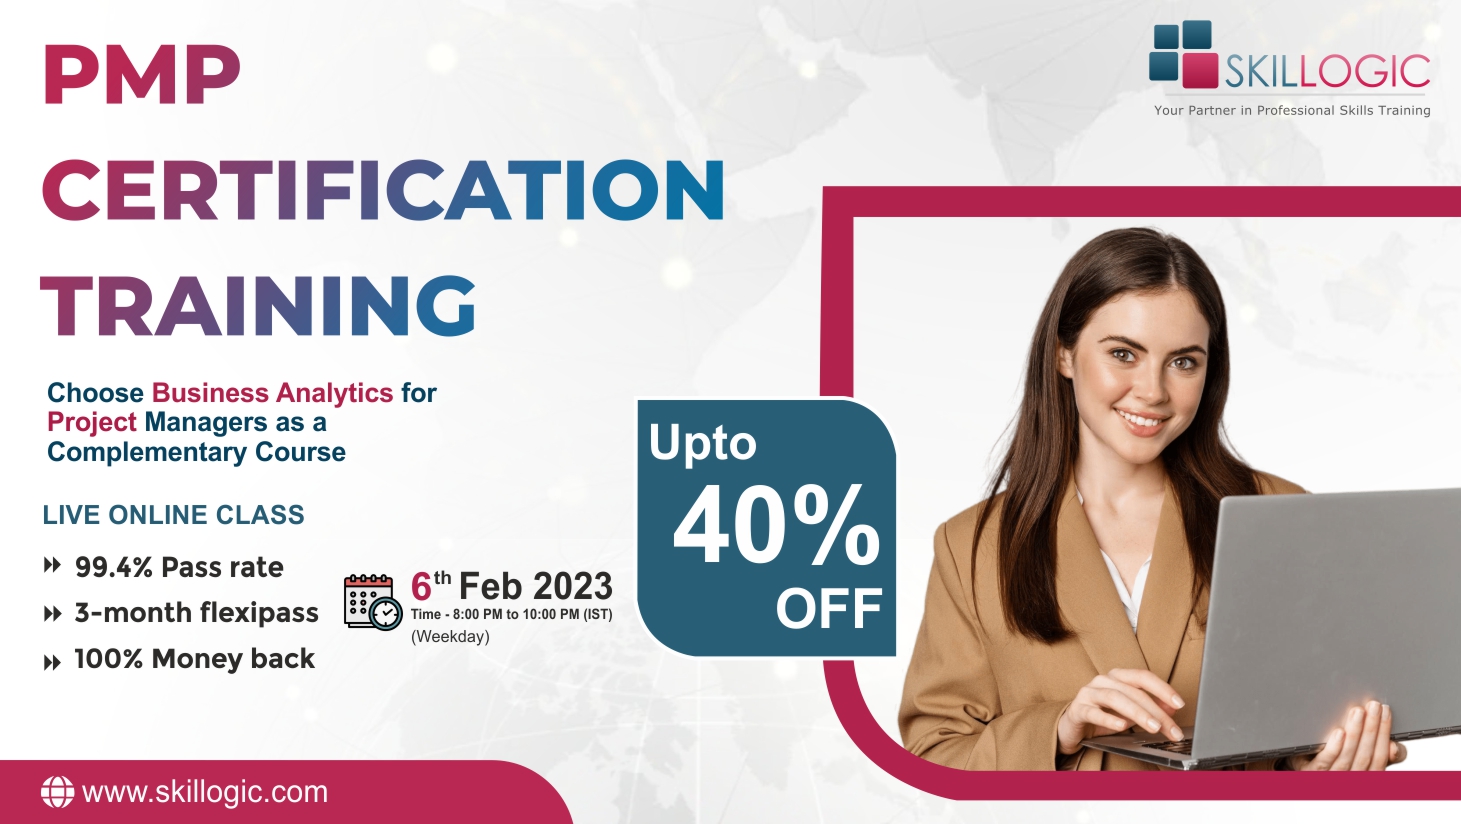 PMP Course in Jaipur, Online Event